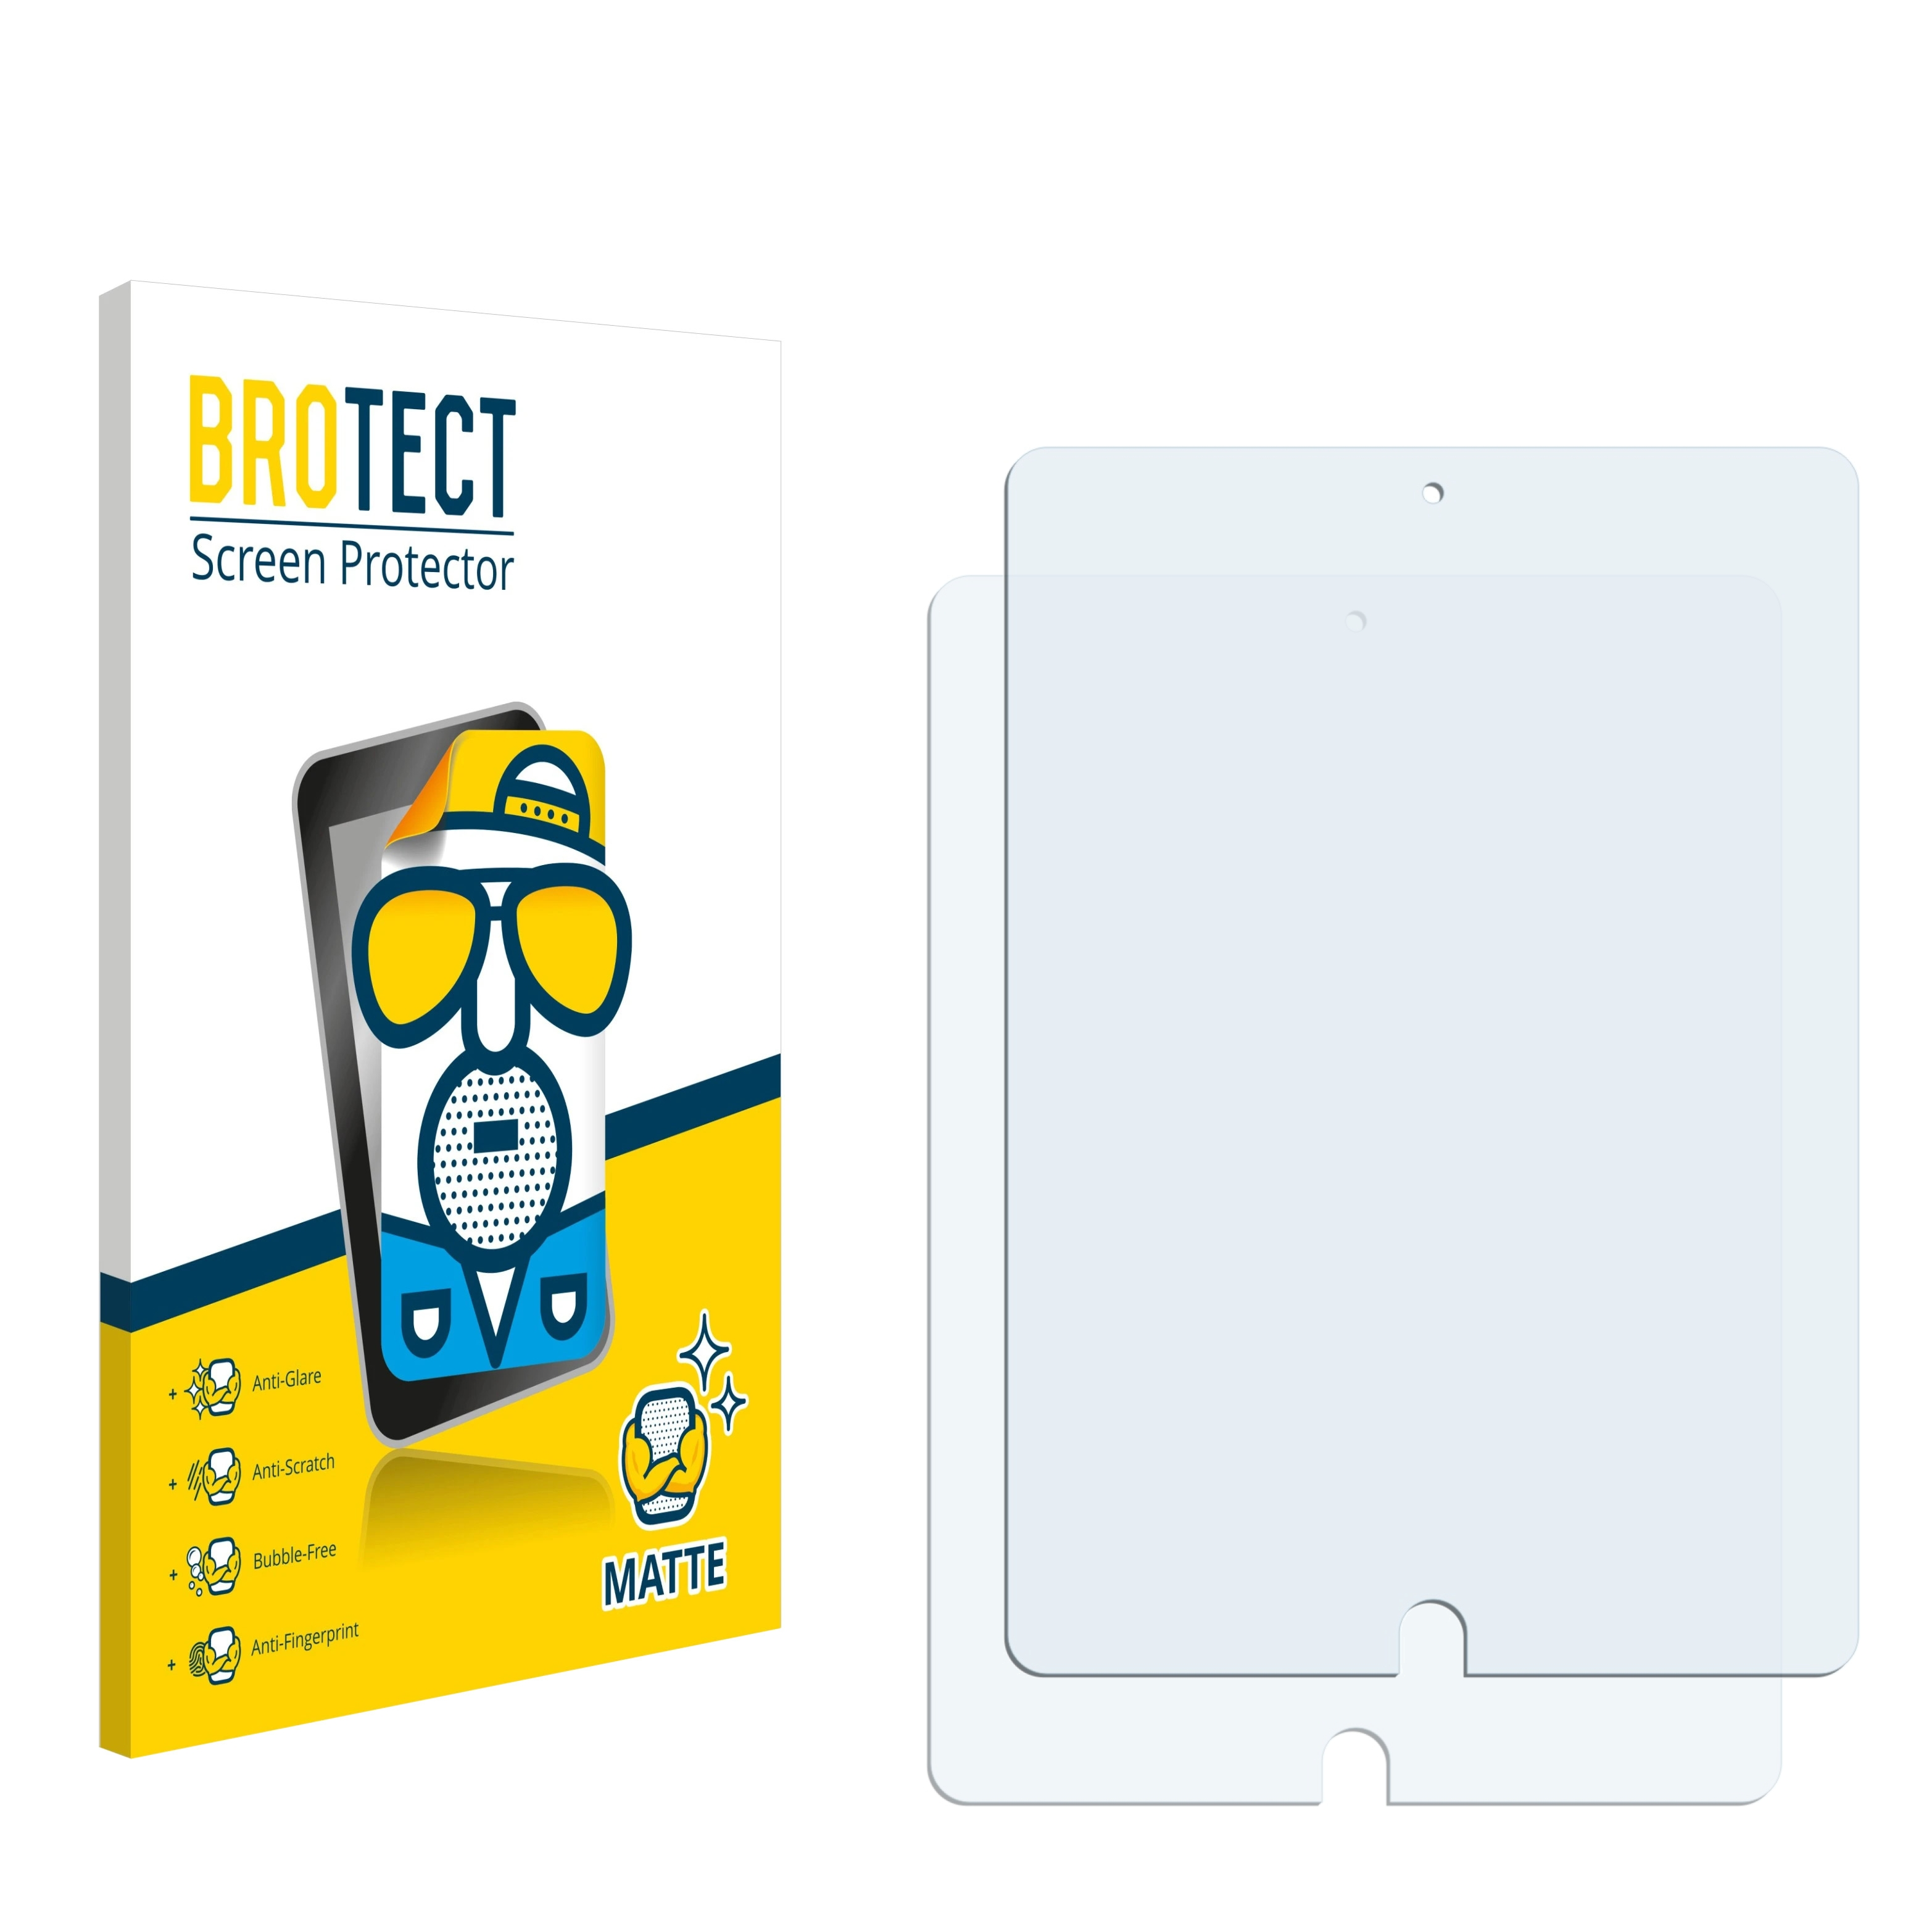 BROTECT 2x WiFi Cellular matte 2021 10.2\